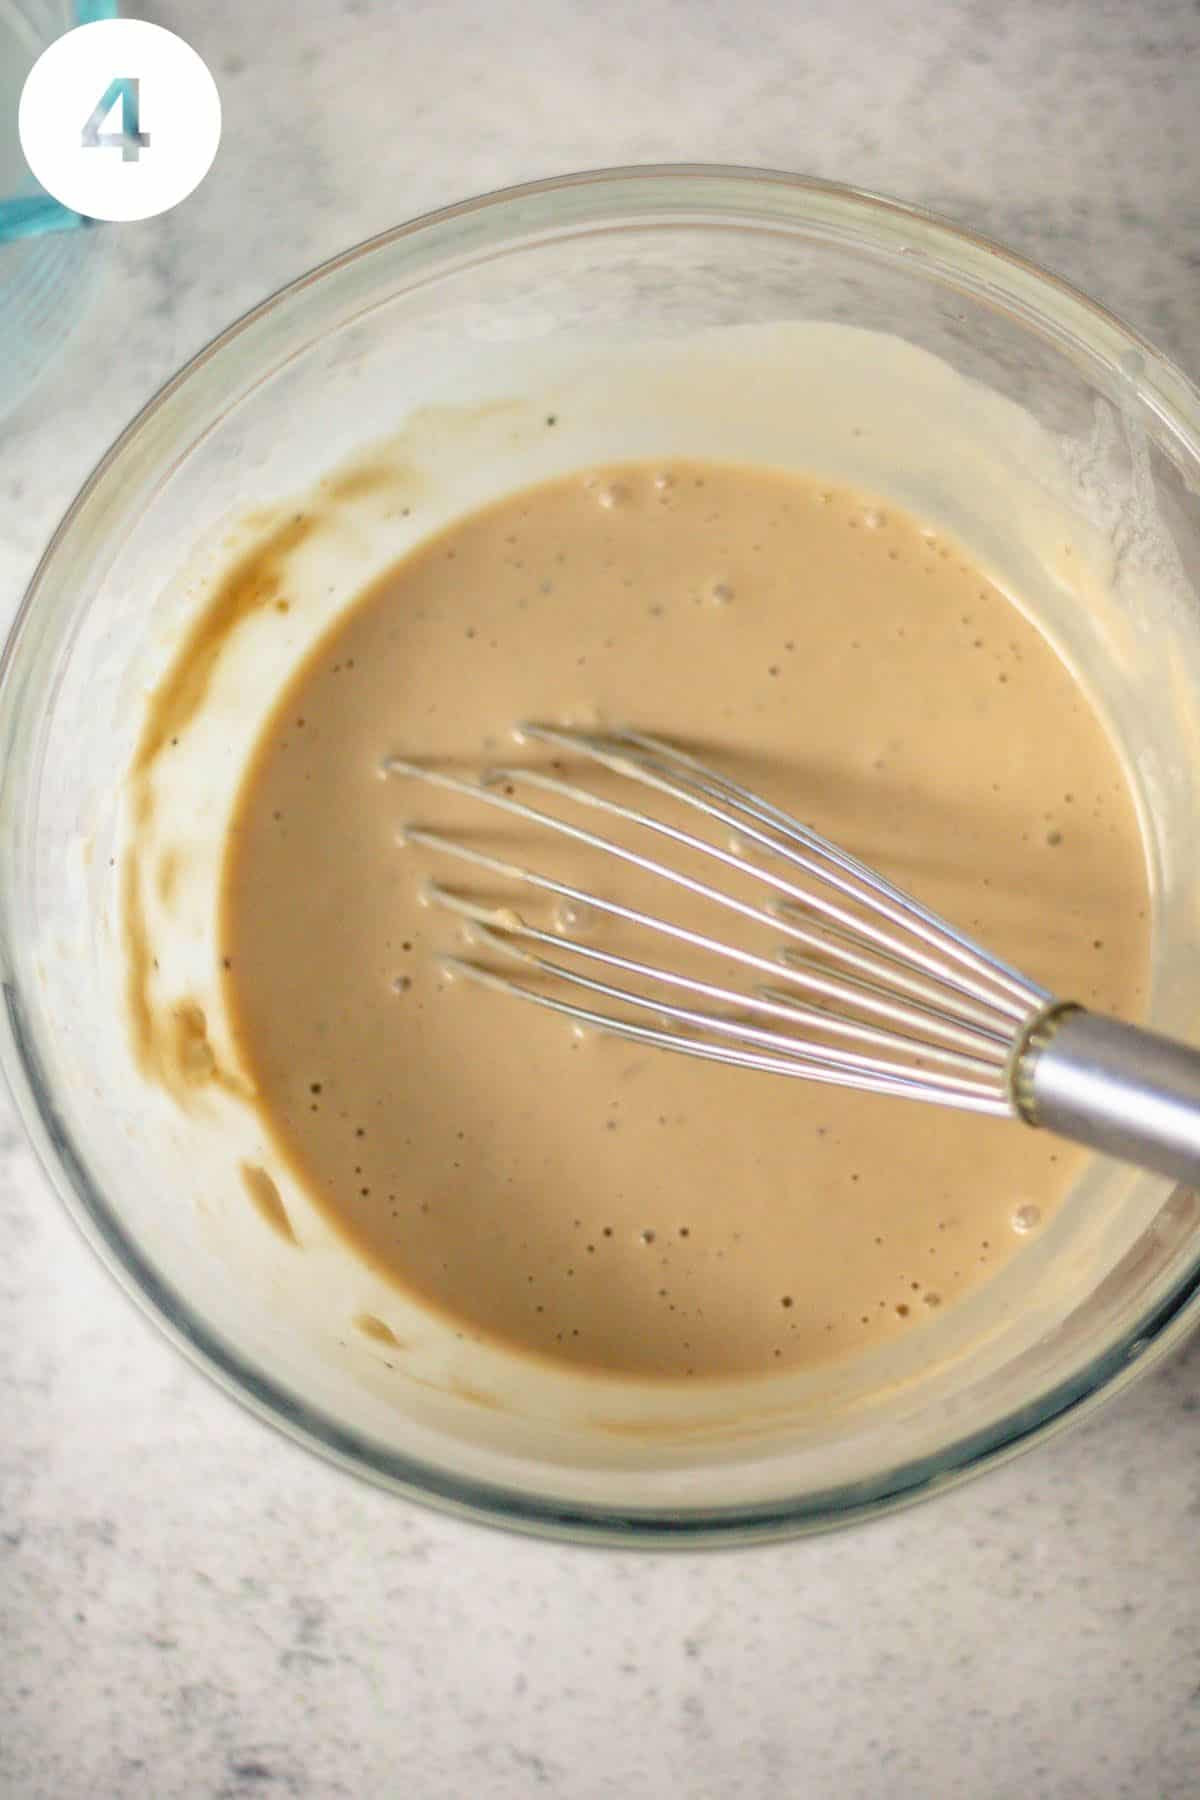 Step 4 is shown whisking the pasta water into the tahini sauce. The photo is labeled with a "4" in the upper left corner.